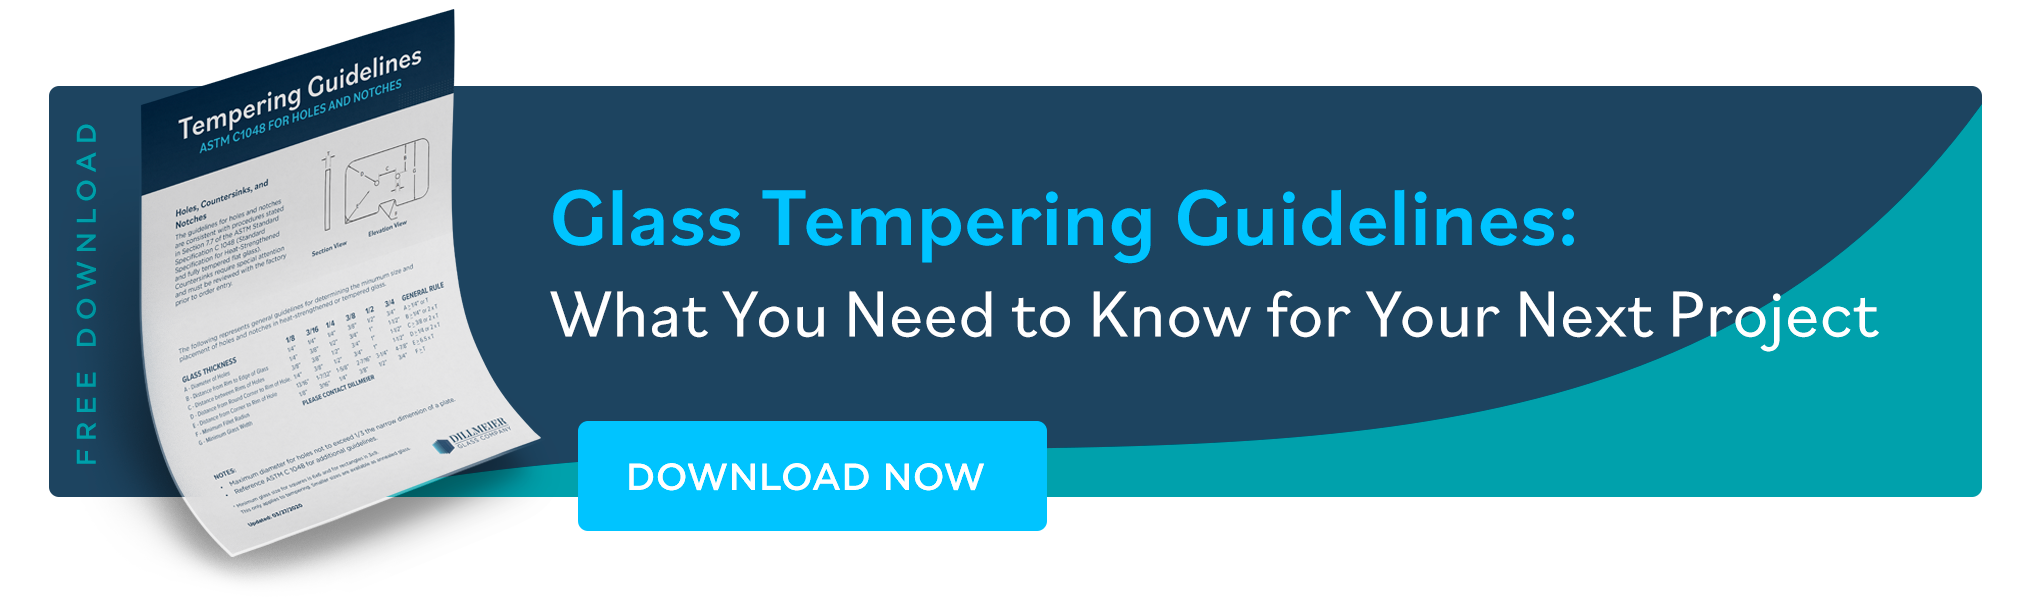 Download Now: Mockup of Tempering Guidelines pdf with text - Glass Tempering Guidelines: What you need to know for your next project